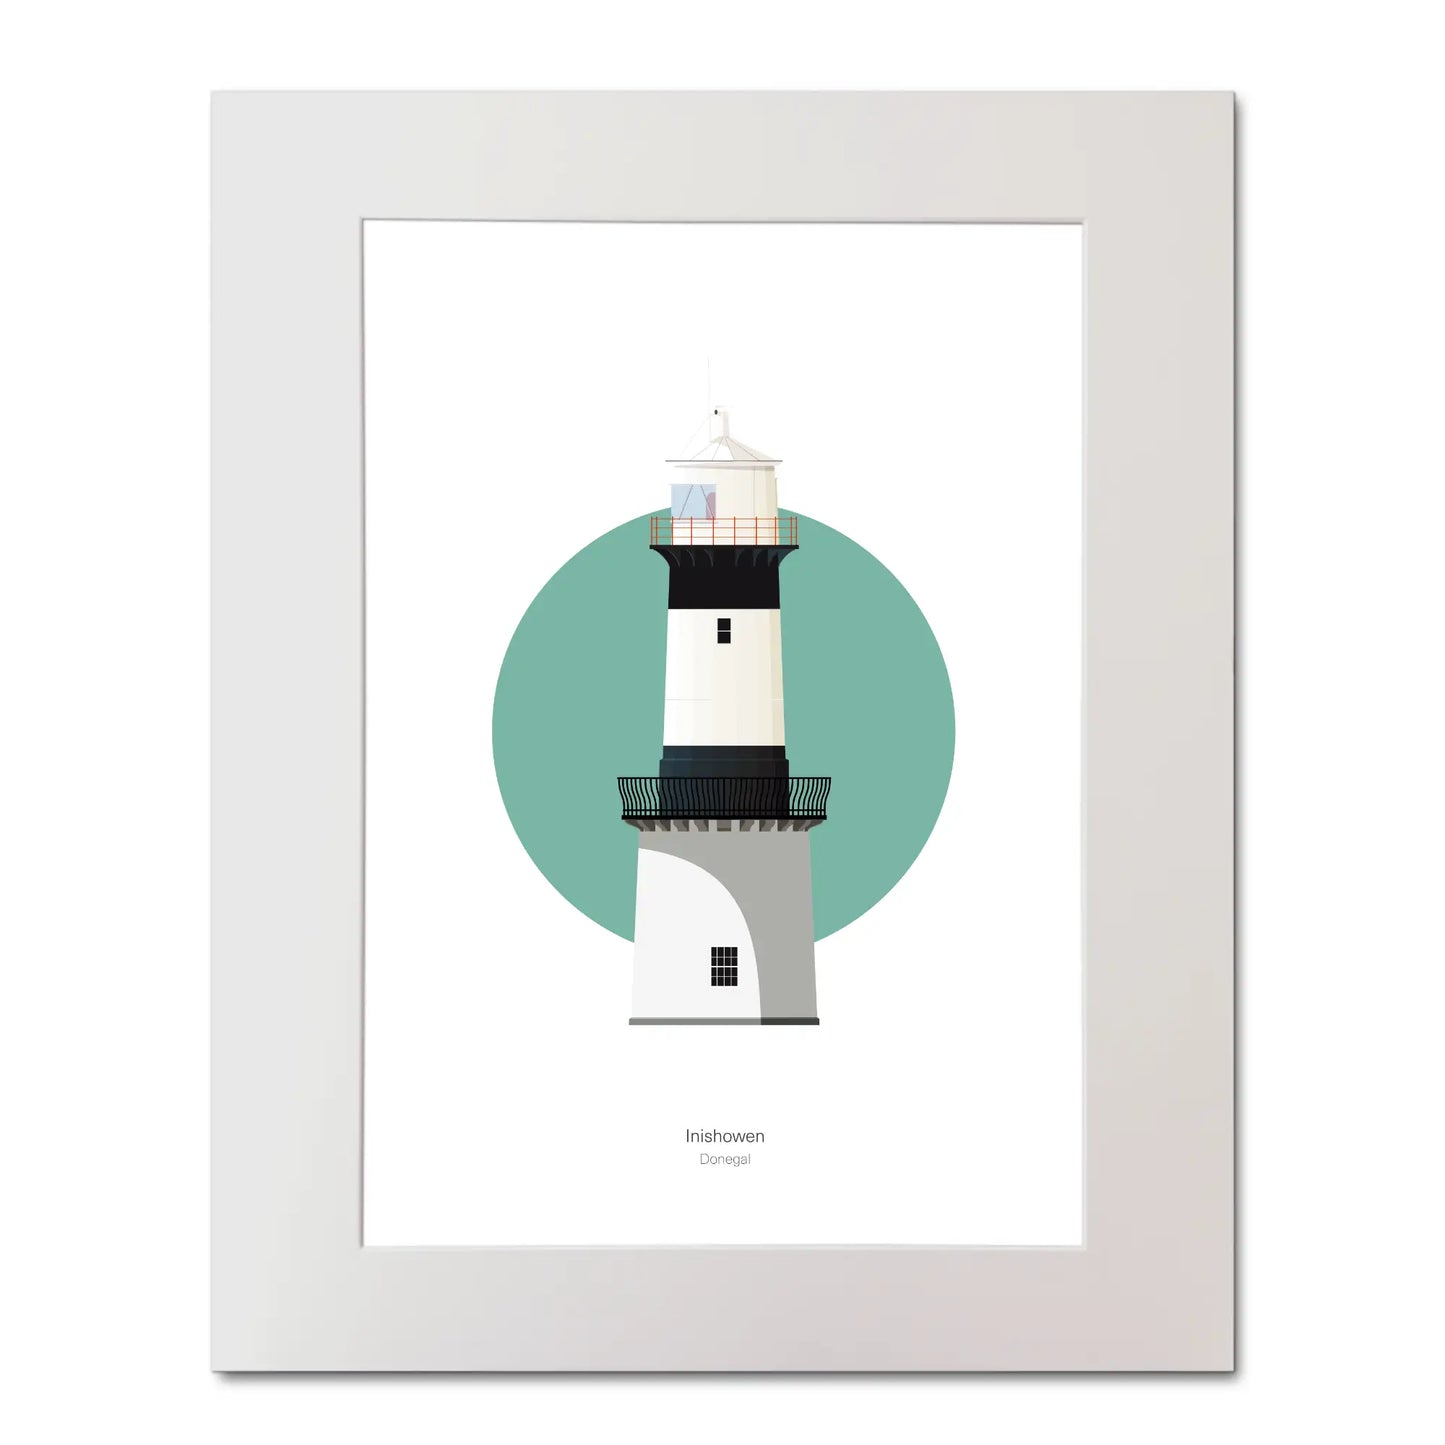 Illustration of Inishowen lighthouse on a white background inside light blue square, mounted and measuring 40x50cm.